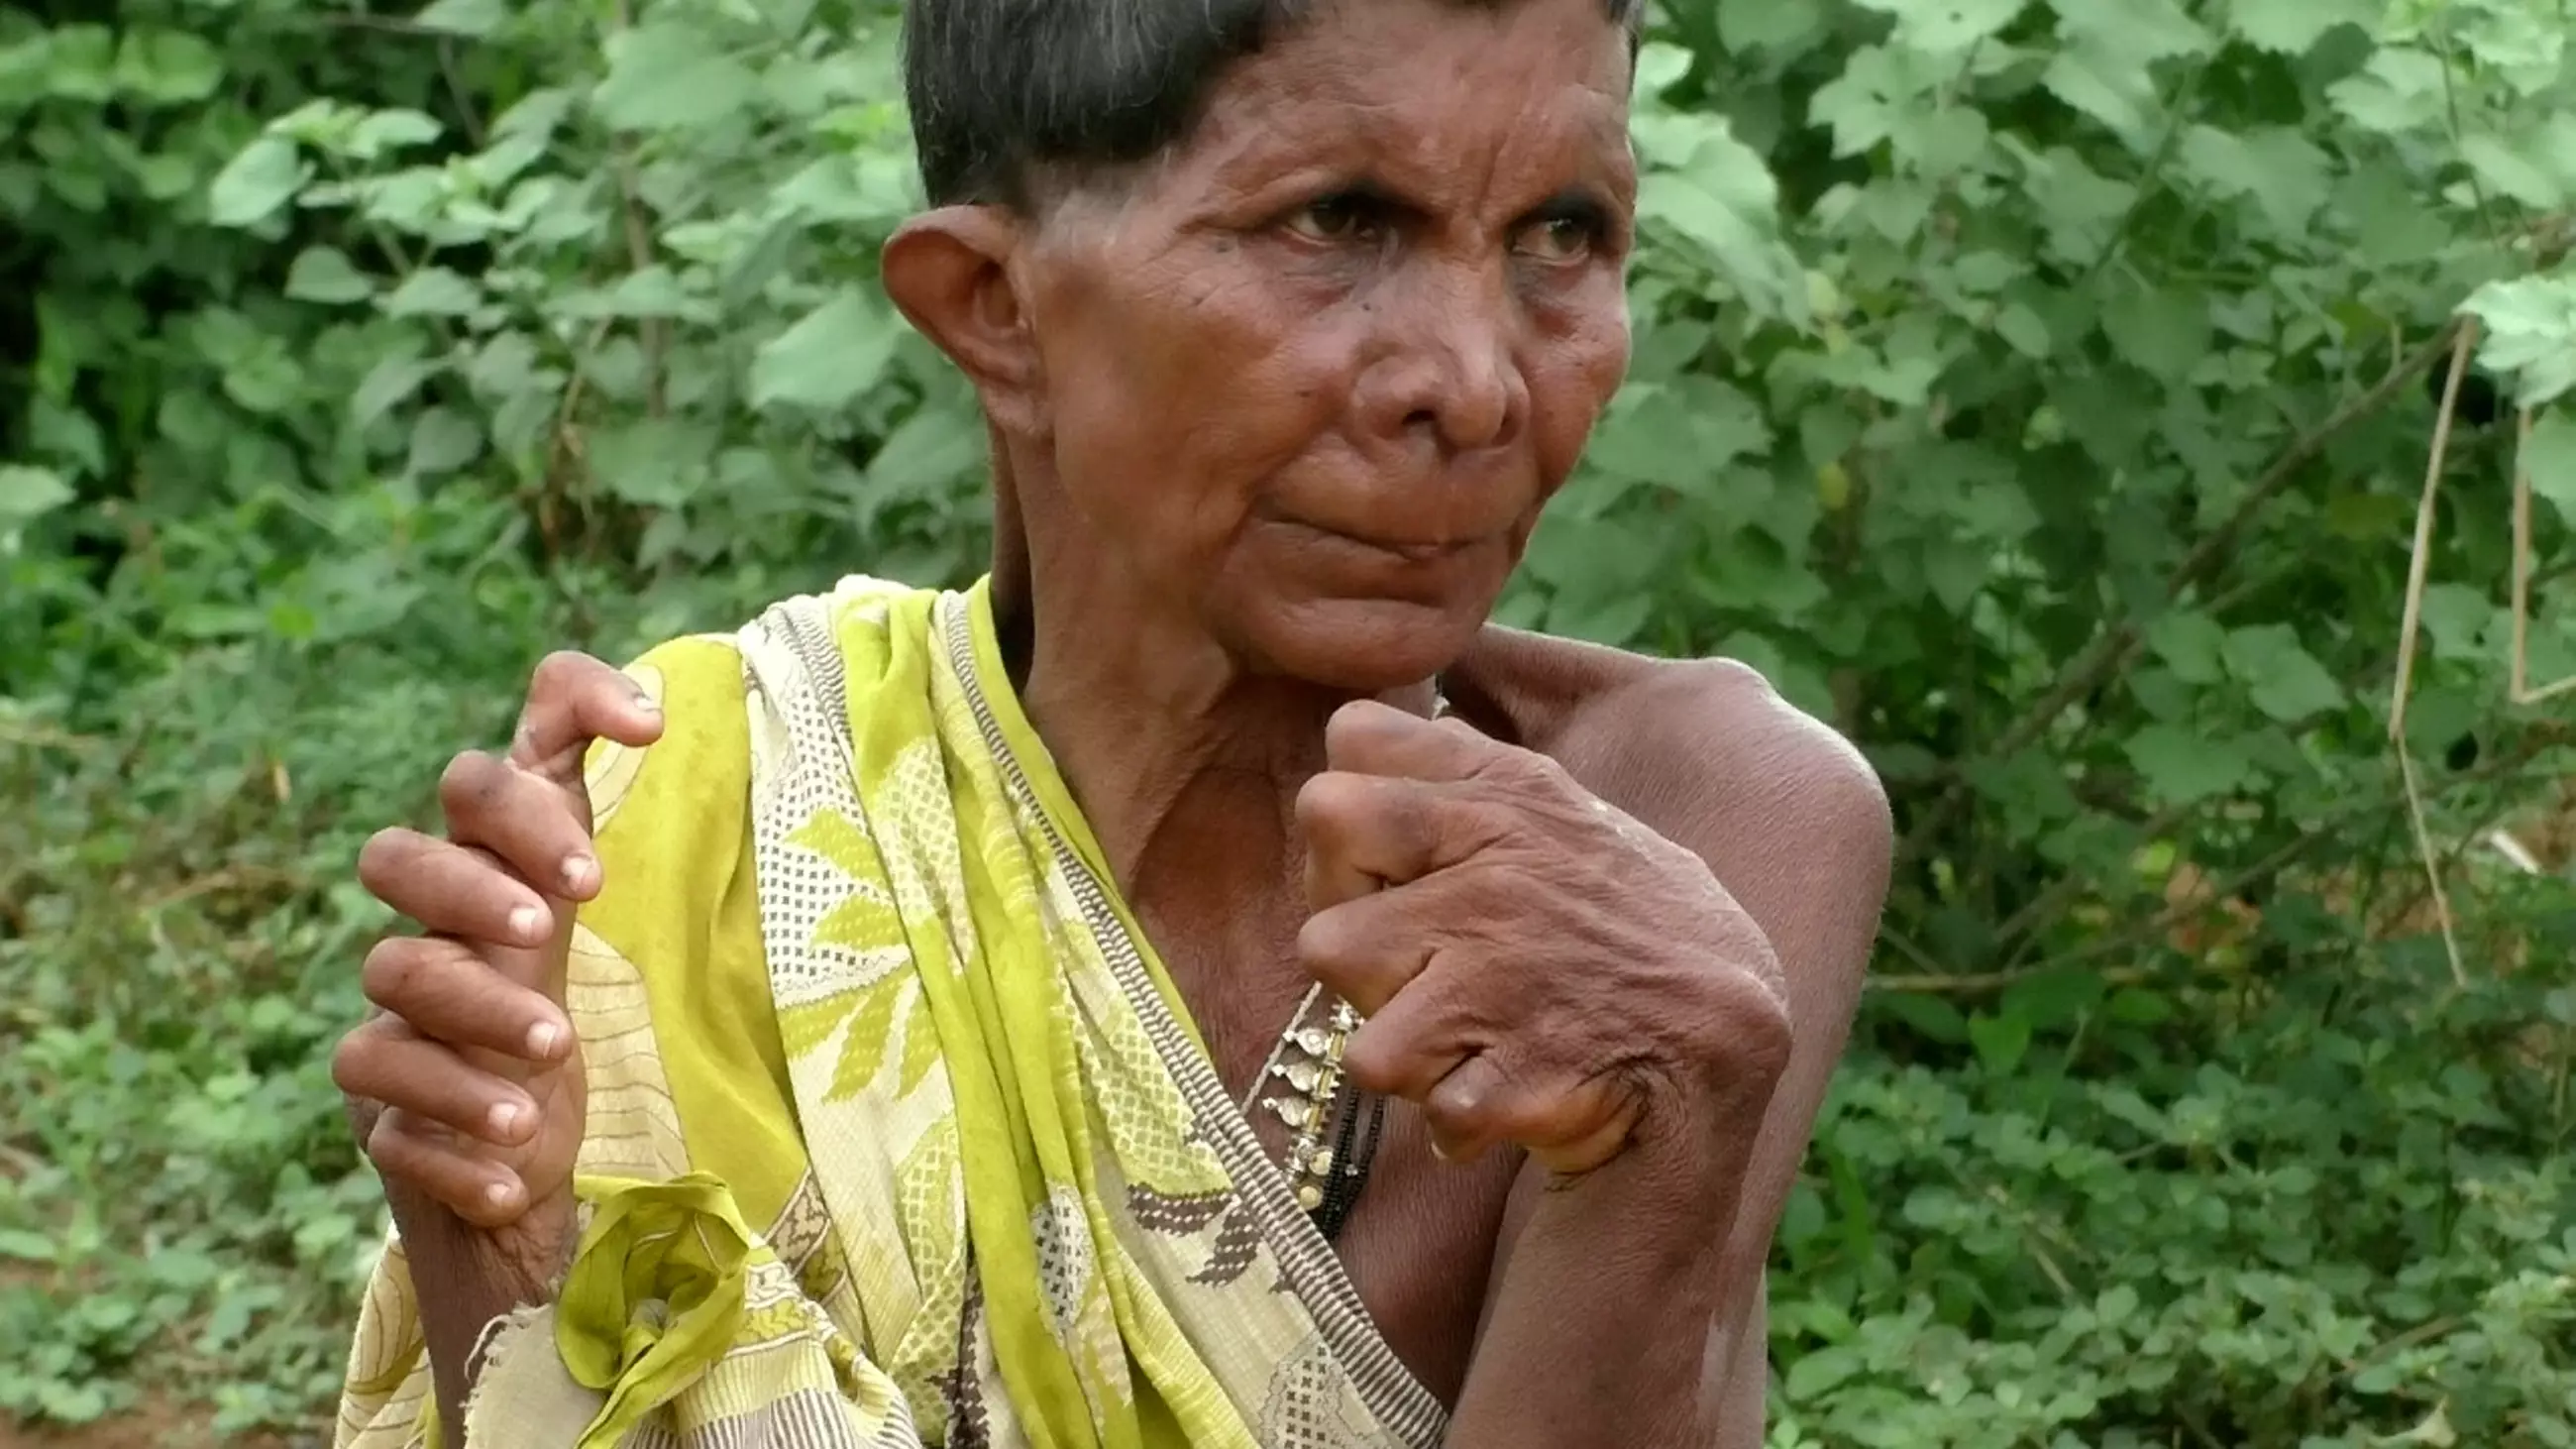 Woman Born With 20 Toes And 12 Fingers Says People Think She's A Witch